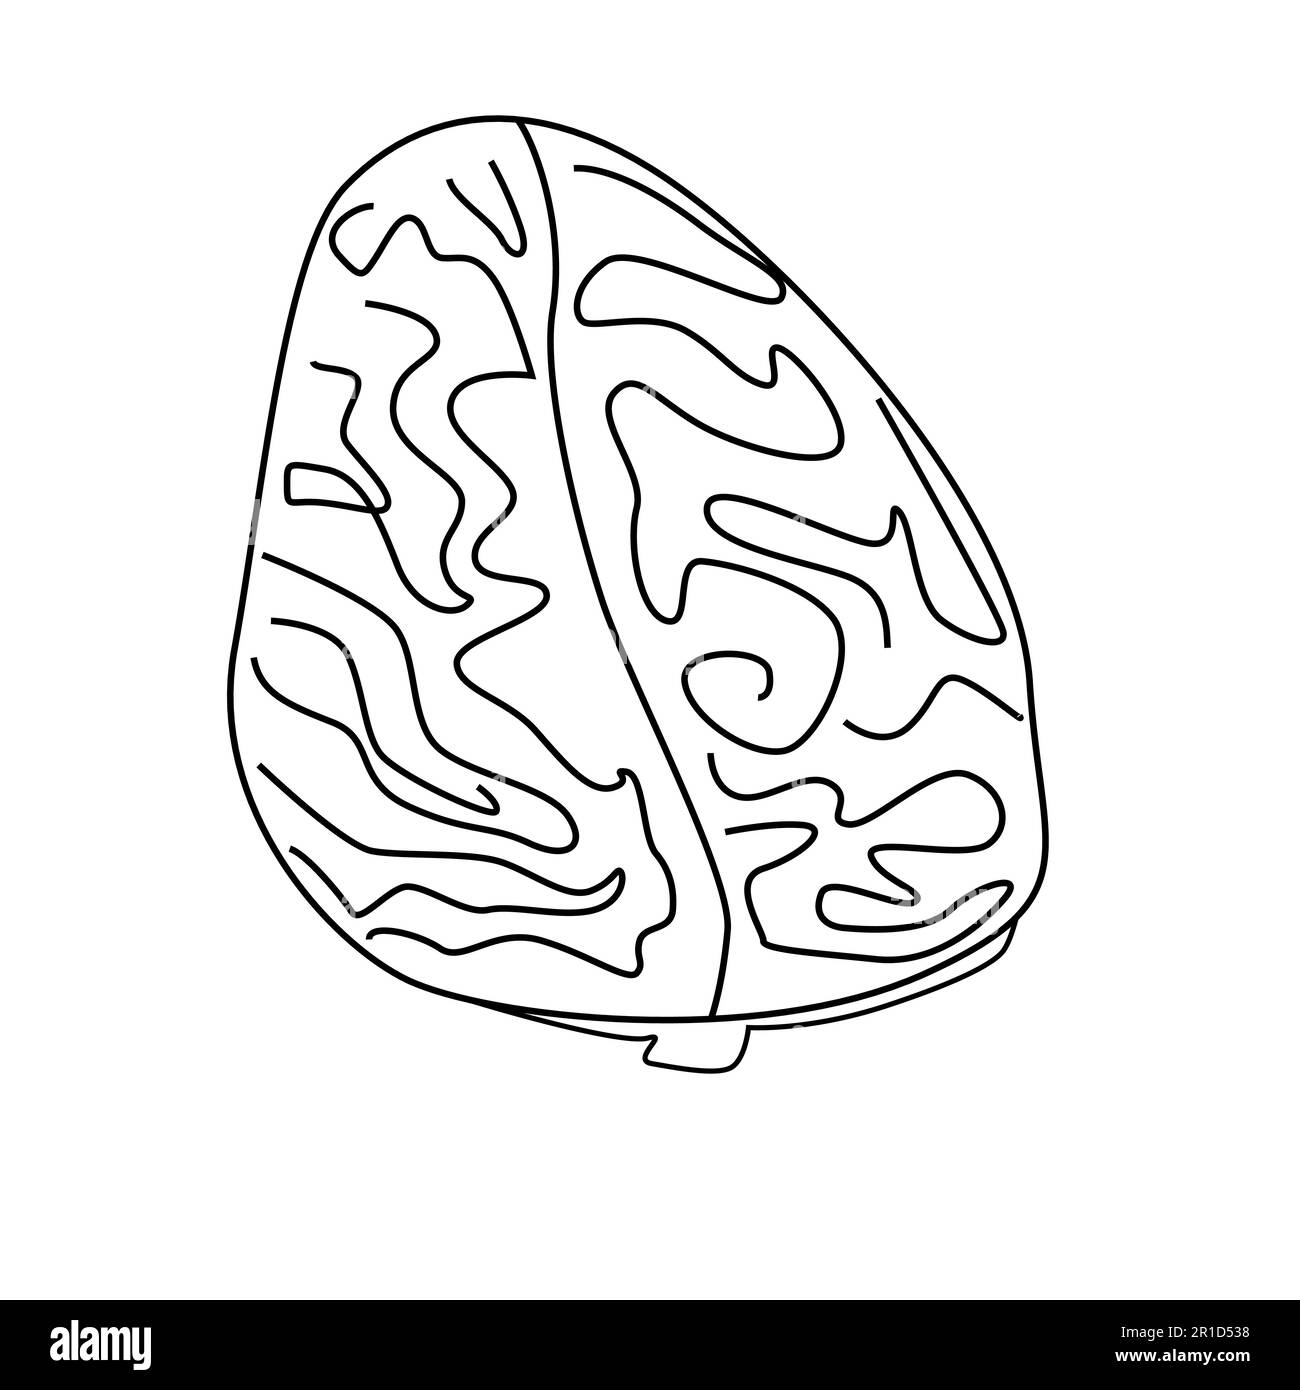 vector illustration of the human brain top view Stock Vector